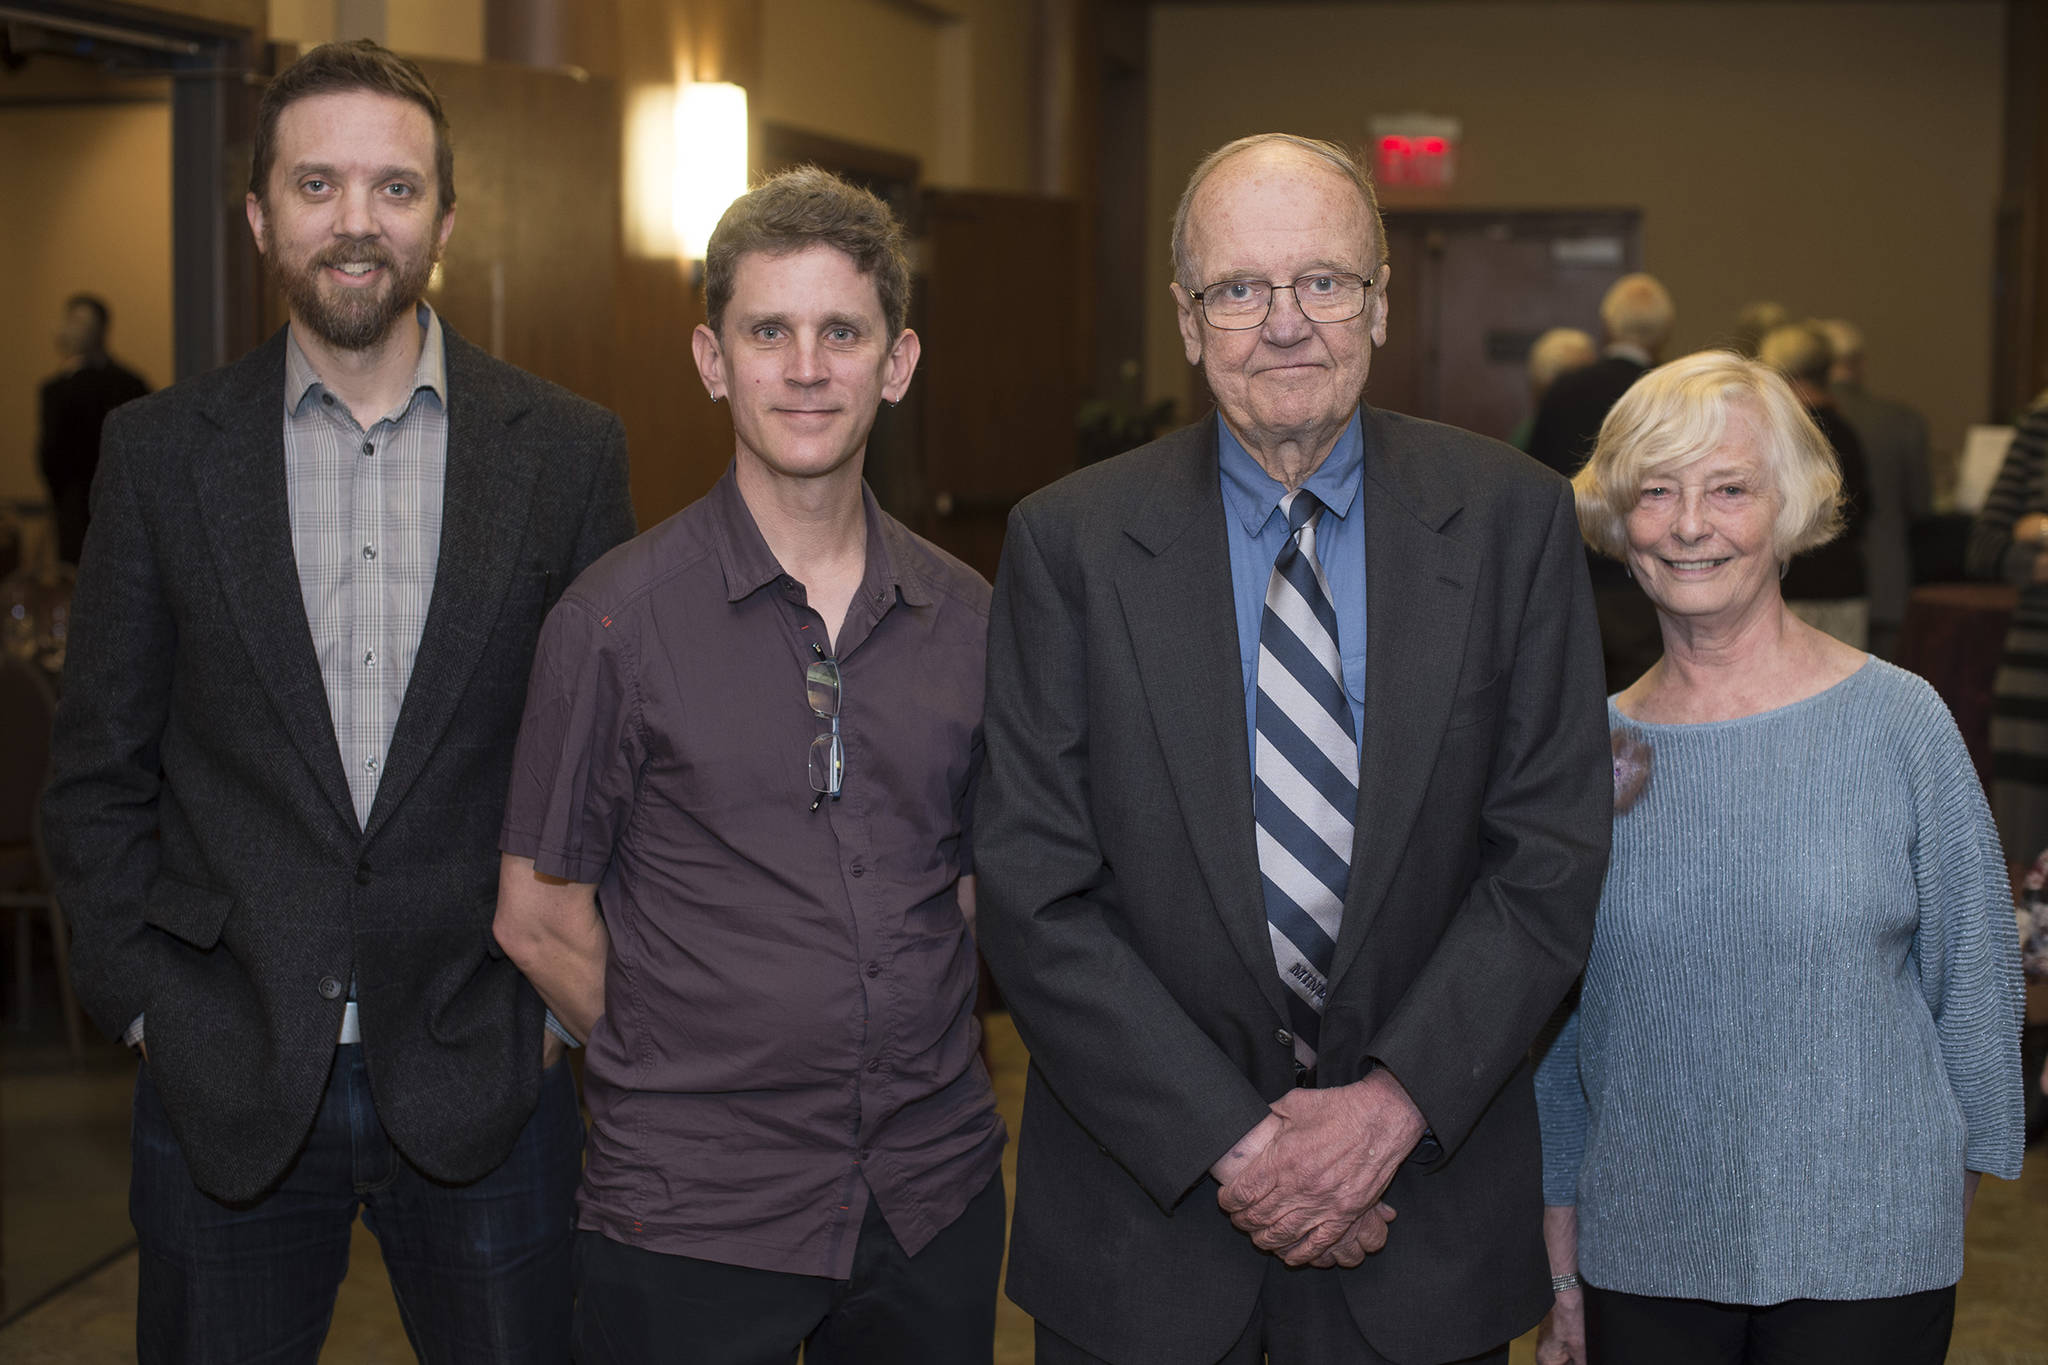 Mike Blackwell with sons, Andrew and Matthew, and friend, Carolyn Naftel. Michael Blackwell was the recipient of the Philanthropist of the Year award from Juneau Community Foundation. (Courtesy Photo | Michael Penn via Juneau Community Foundation)